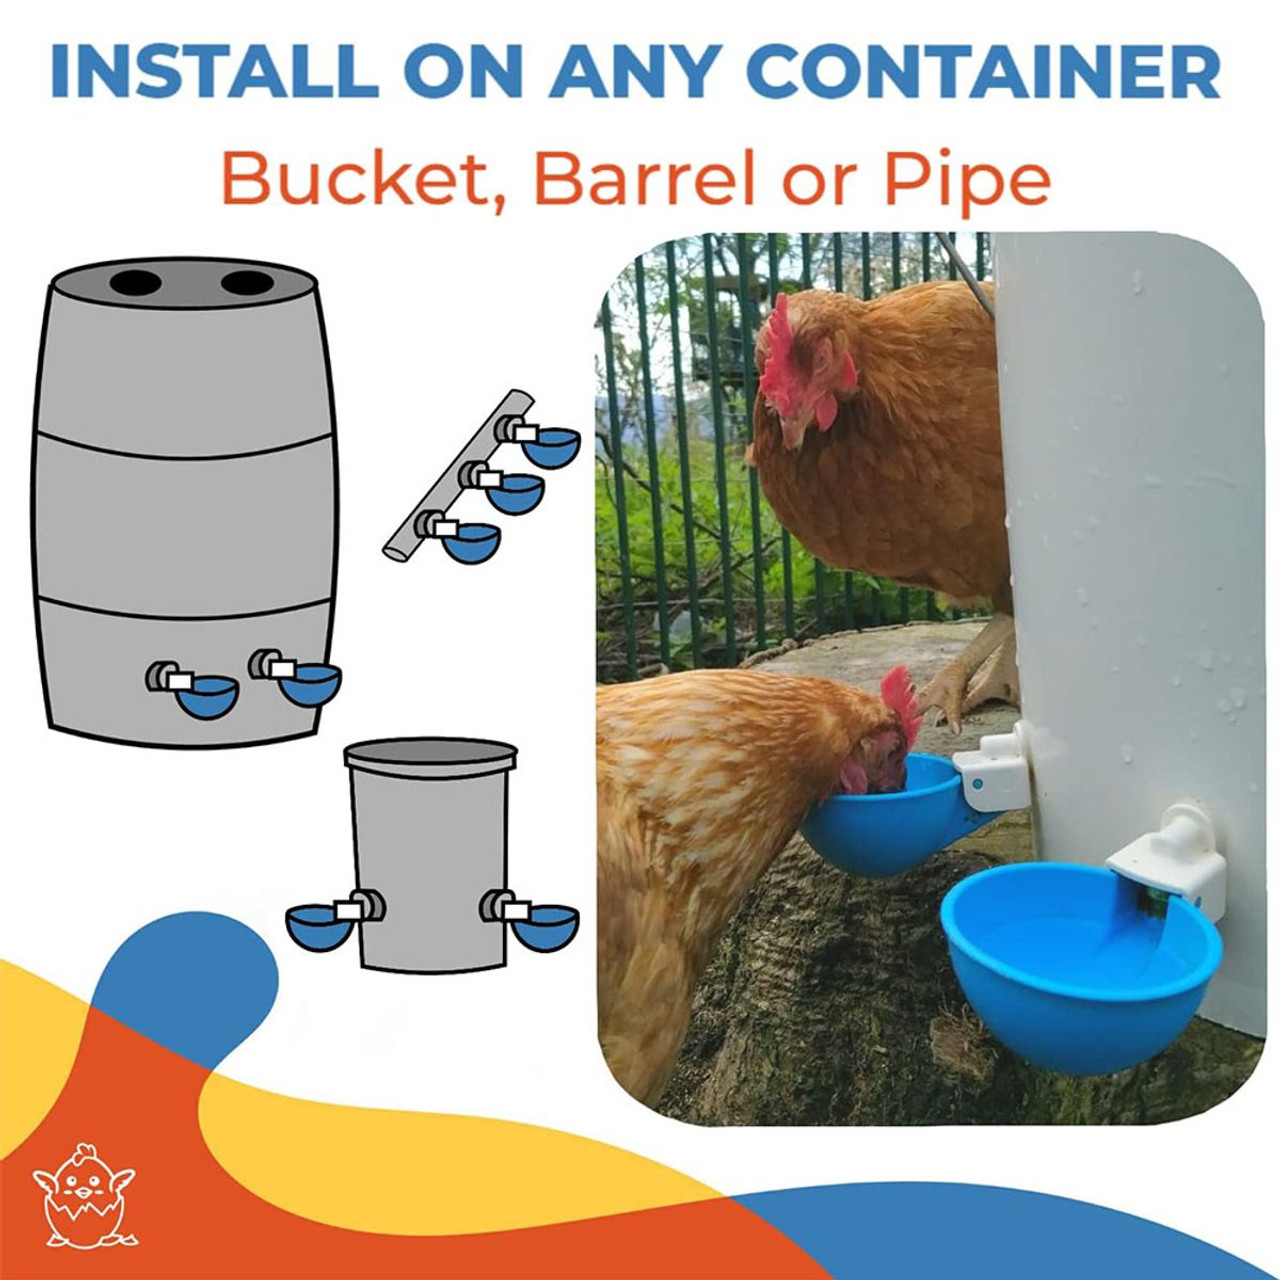 5 Pack Automatic Chicken Water Cups - Chicken Water Cups Suitable for Ducks, Geese, Turkeys and Bunny - Chicken Water Feeding Kit product image